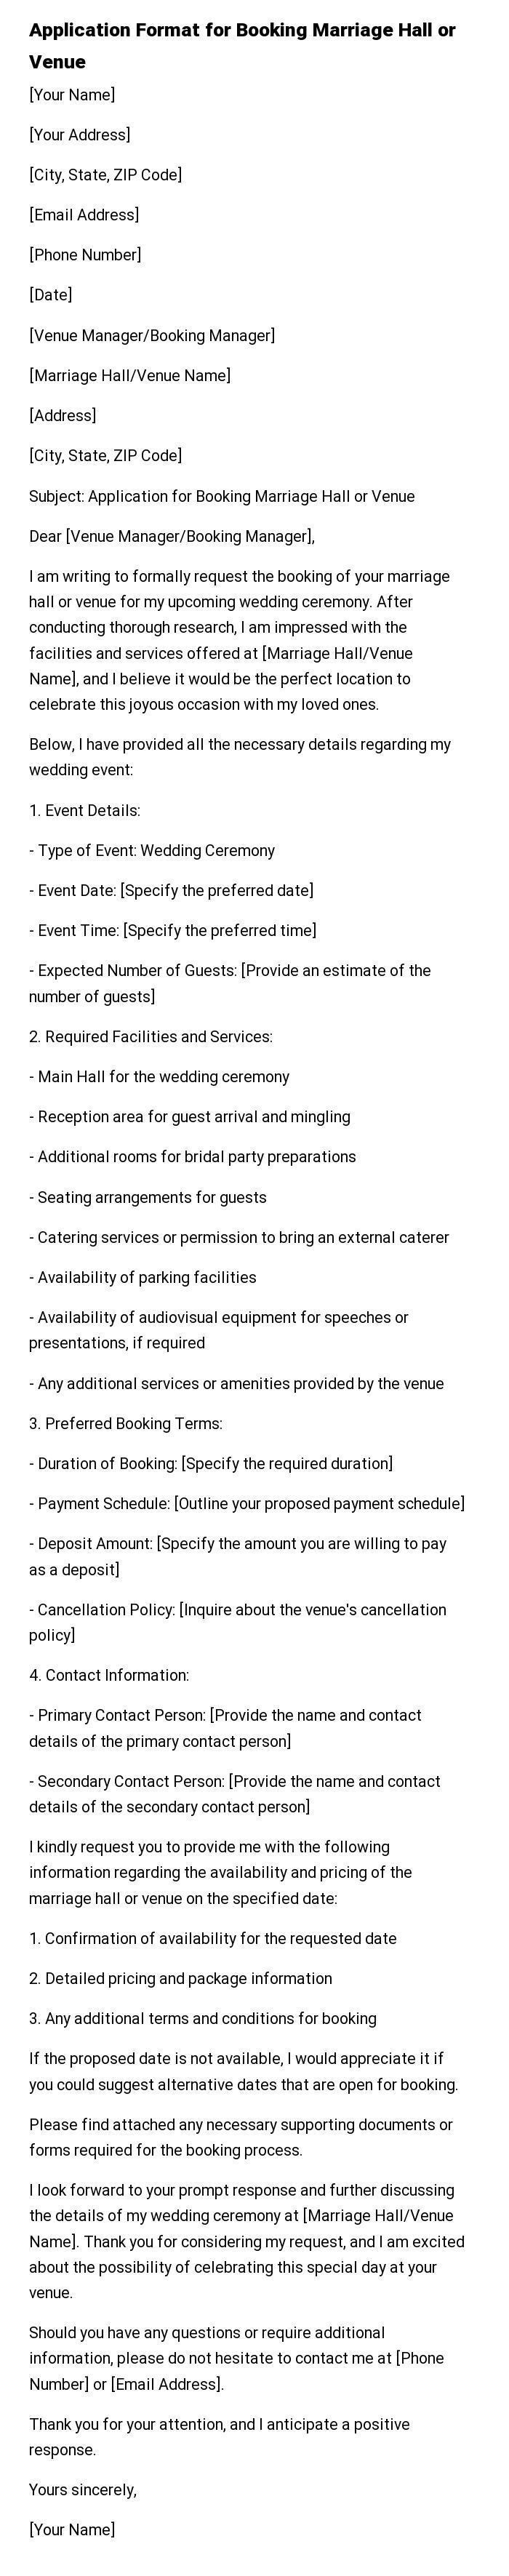 Application Format for Booking Marriage Hall or Venue